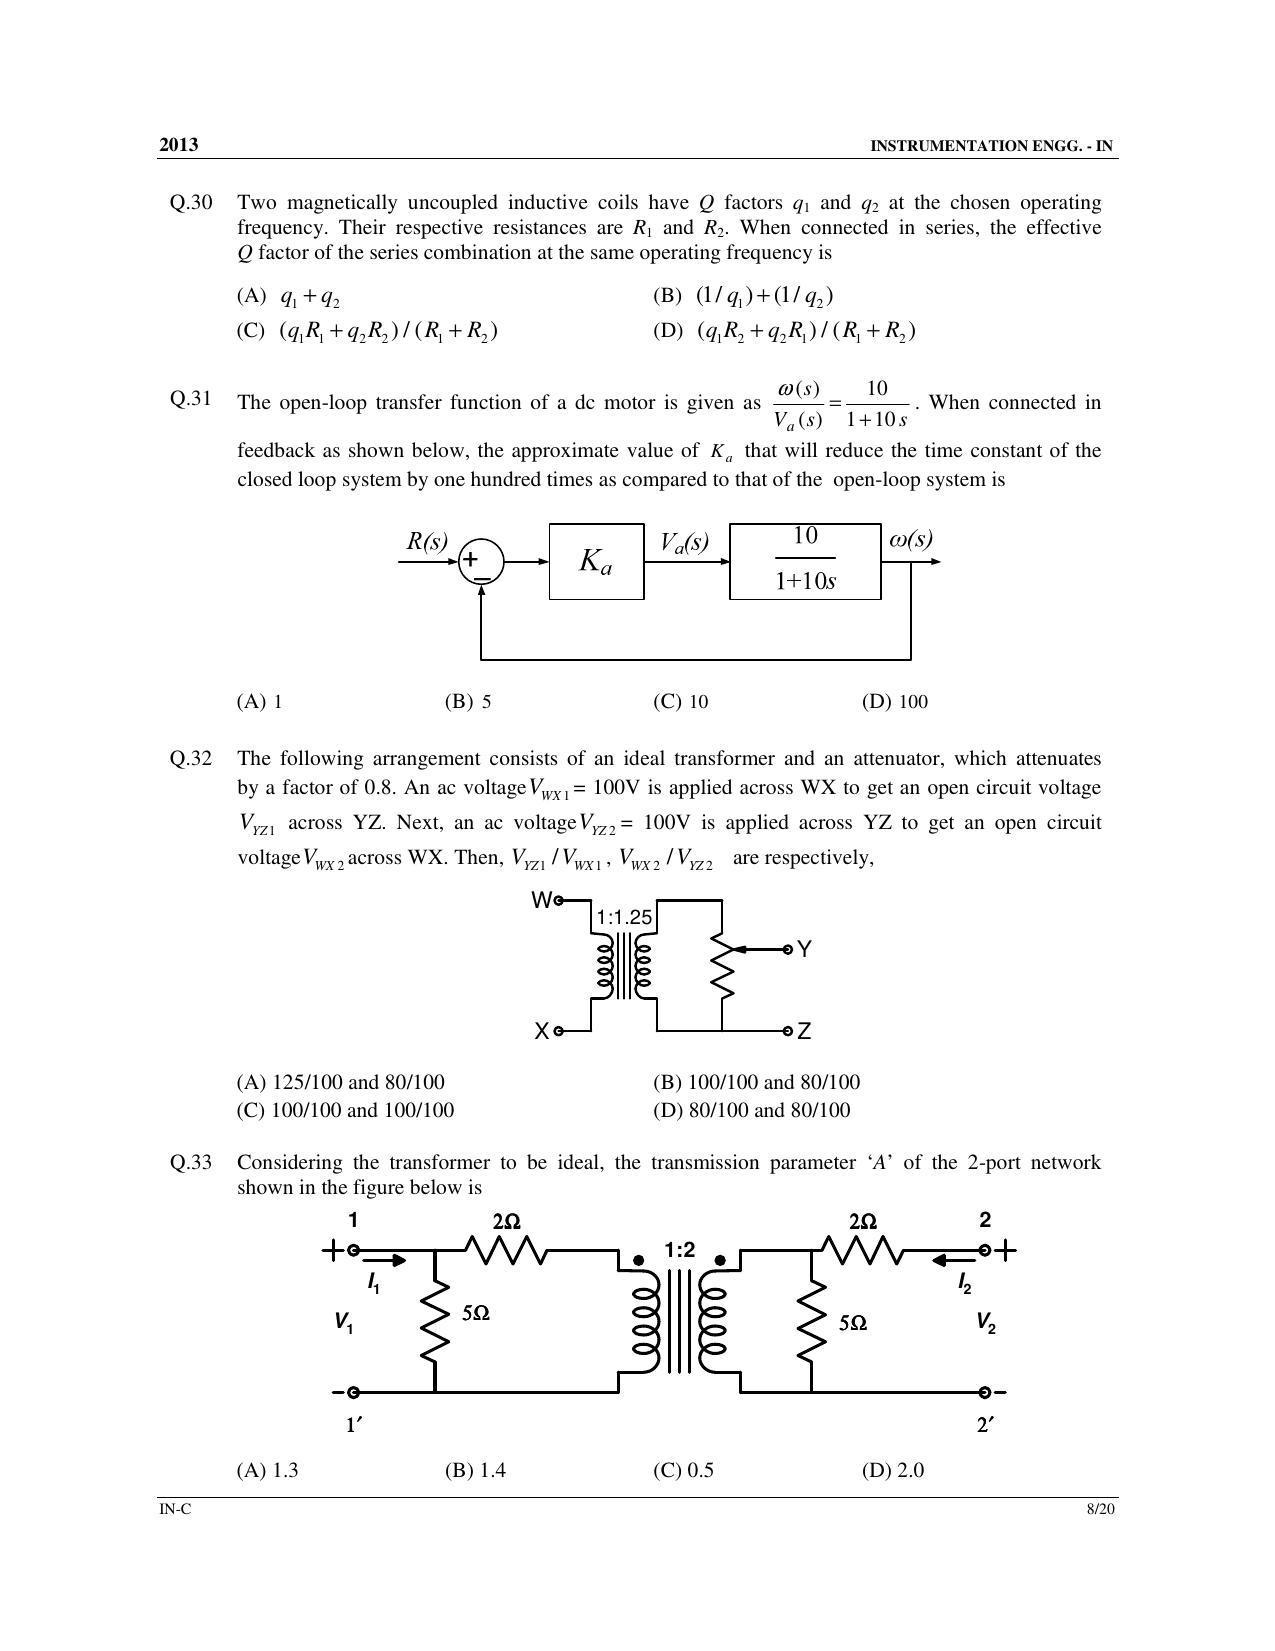 GATE 2013 Instrumentation Engineering (IN) Question Paper with Answer Key - Page 43